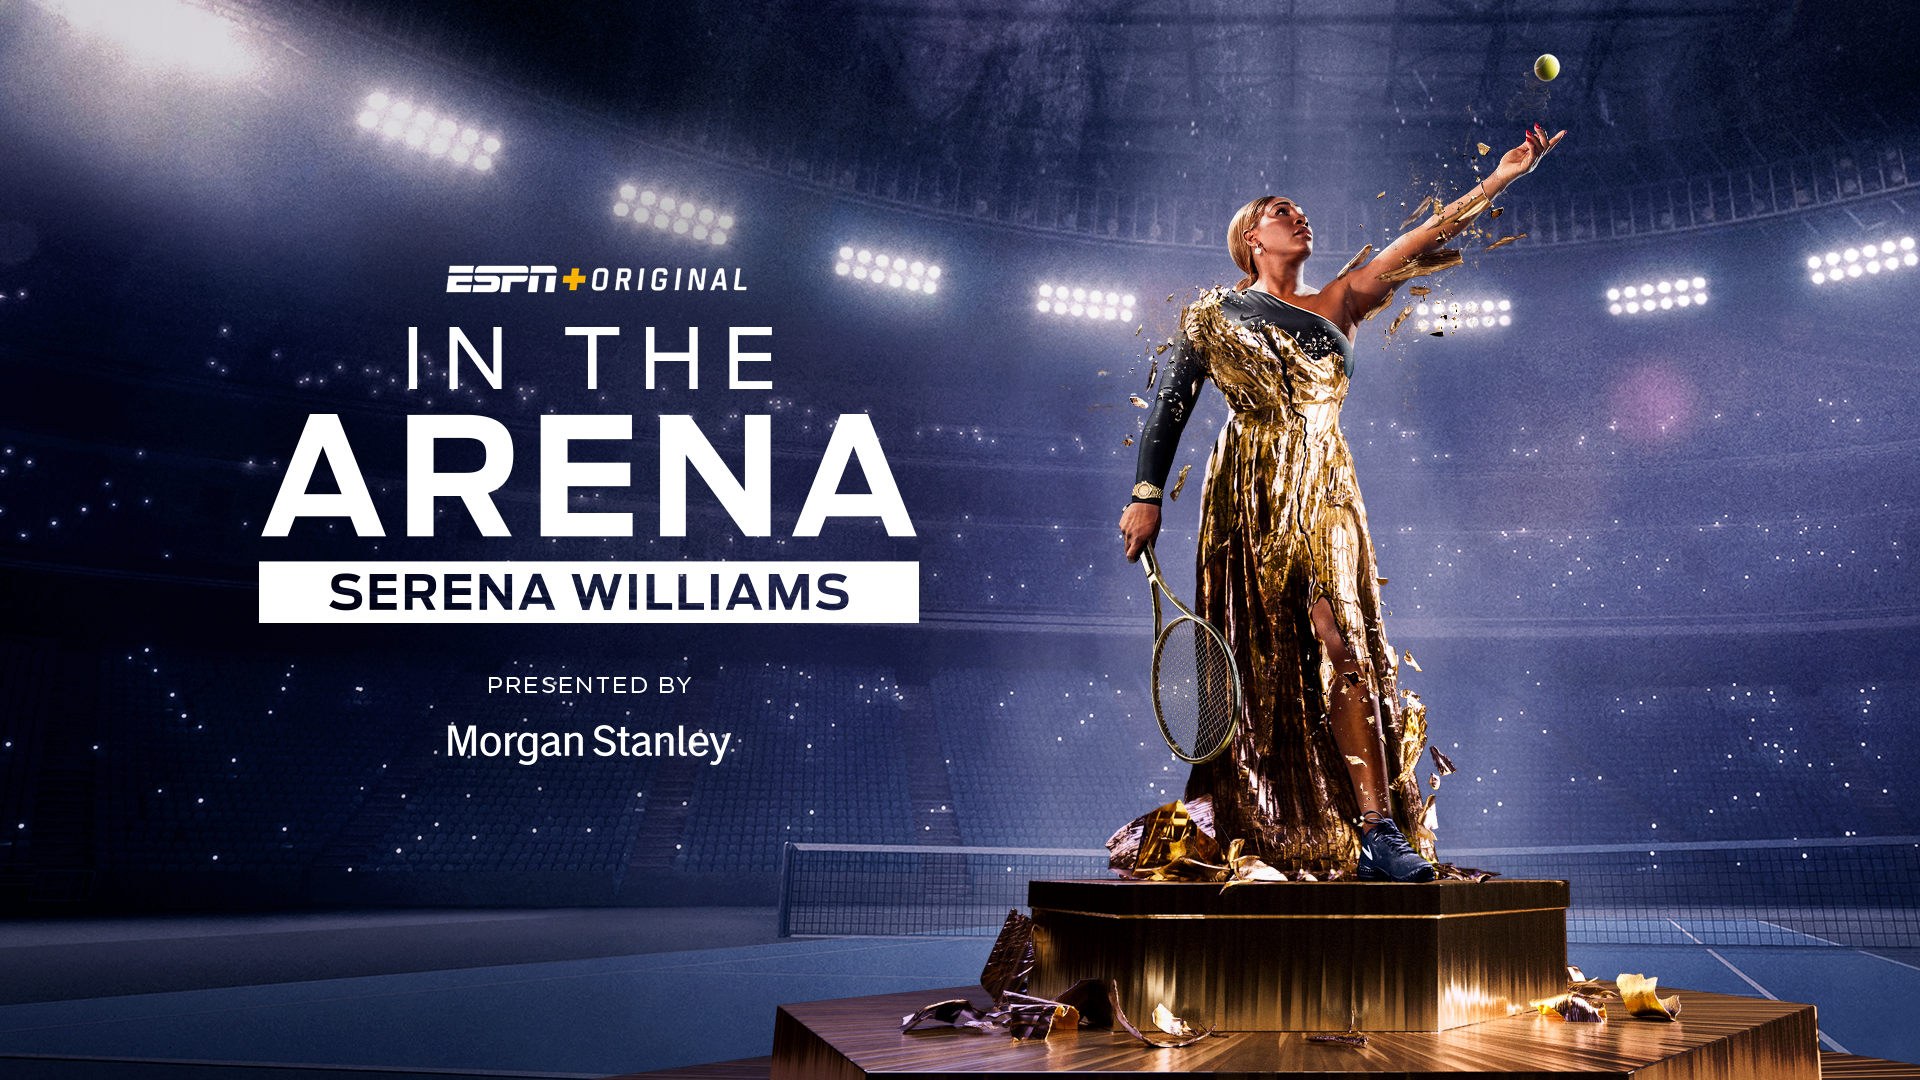 Found out more about the  ESPN+ Original Series "In The Arena: Serena Williams"